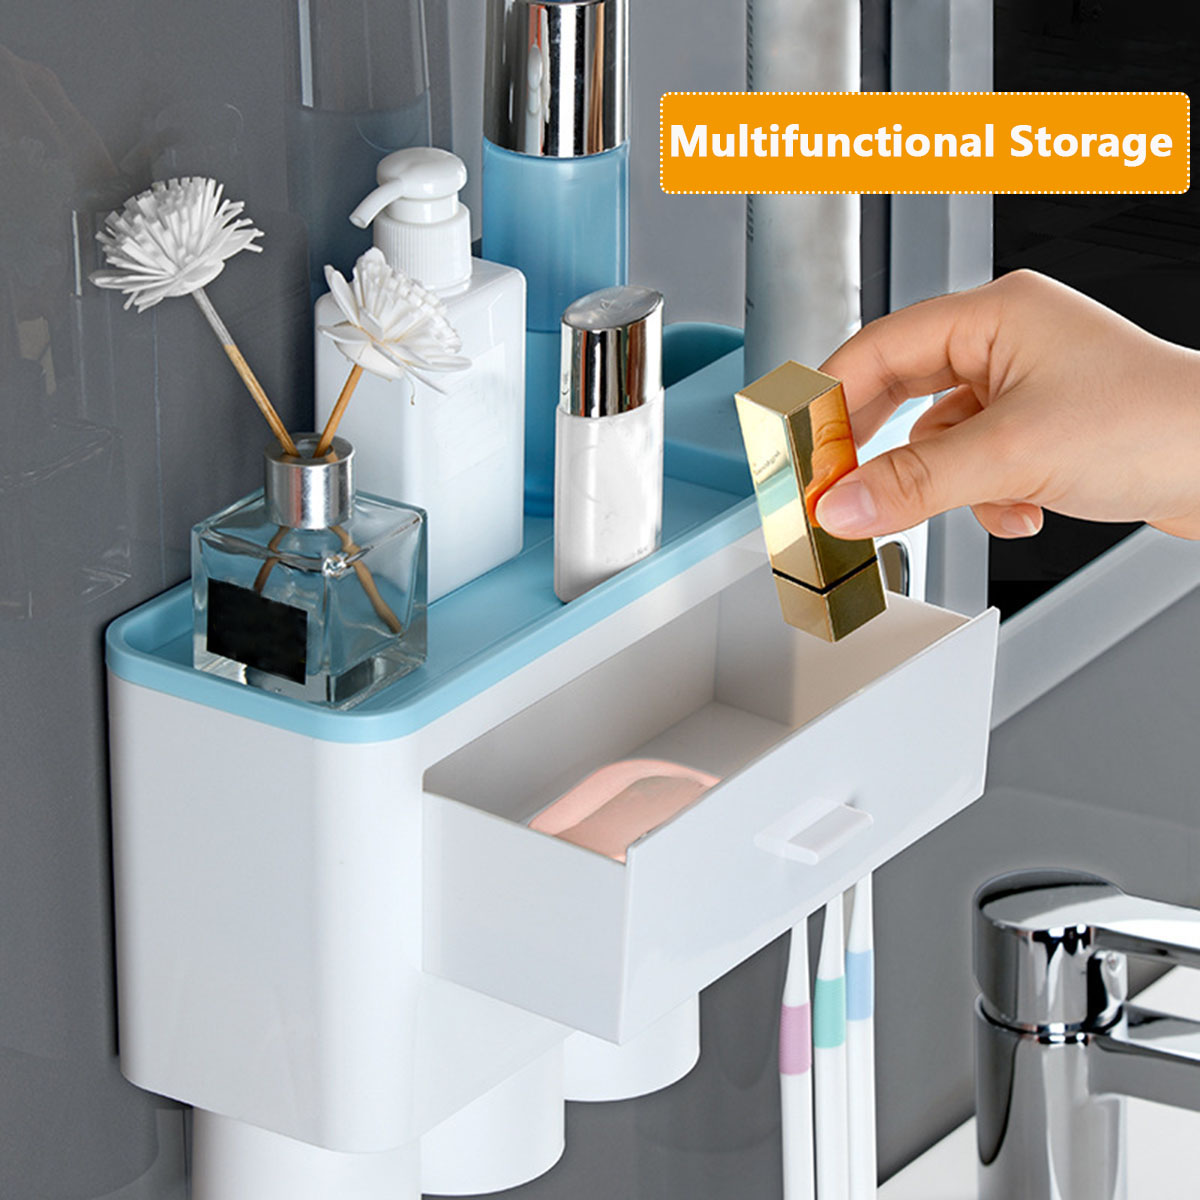 Toothbrush-Holder-Automatic-Toothpaste-Dispenser-With-Cup-Wall-Mount-Toiletries-Storage-Rack-Bathroo-1755230-4